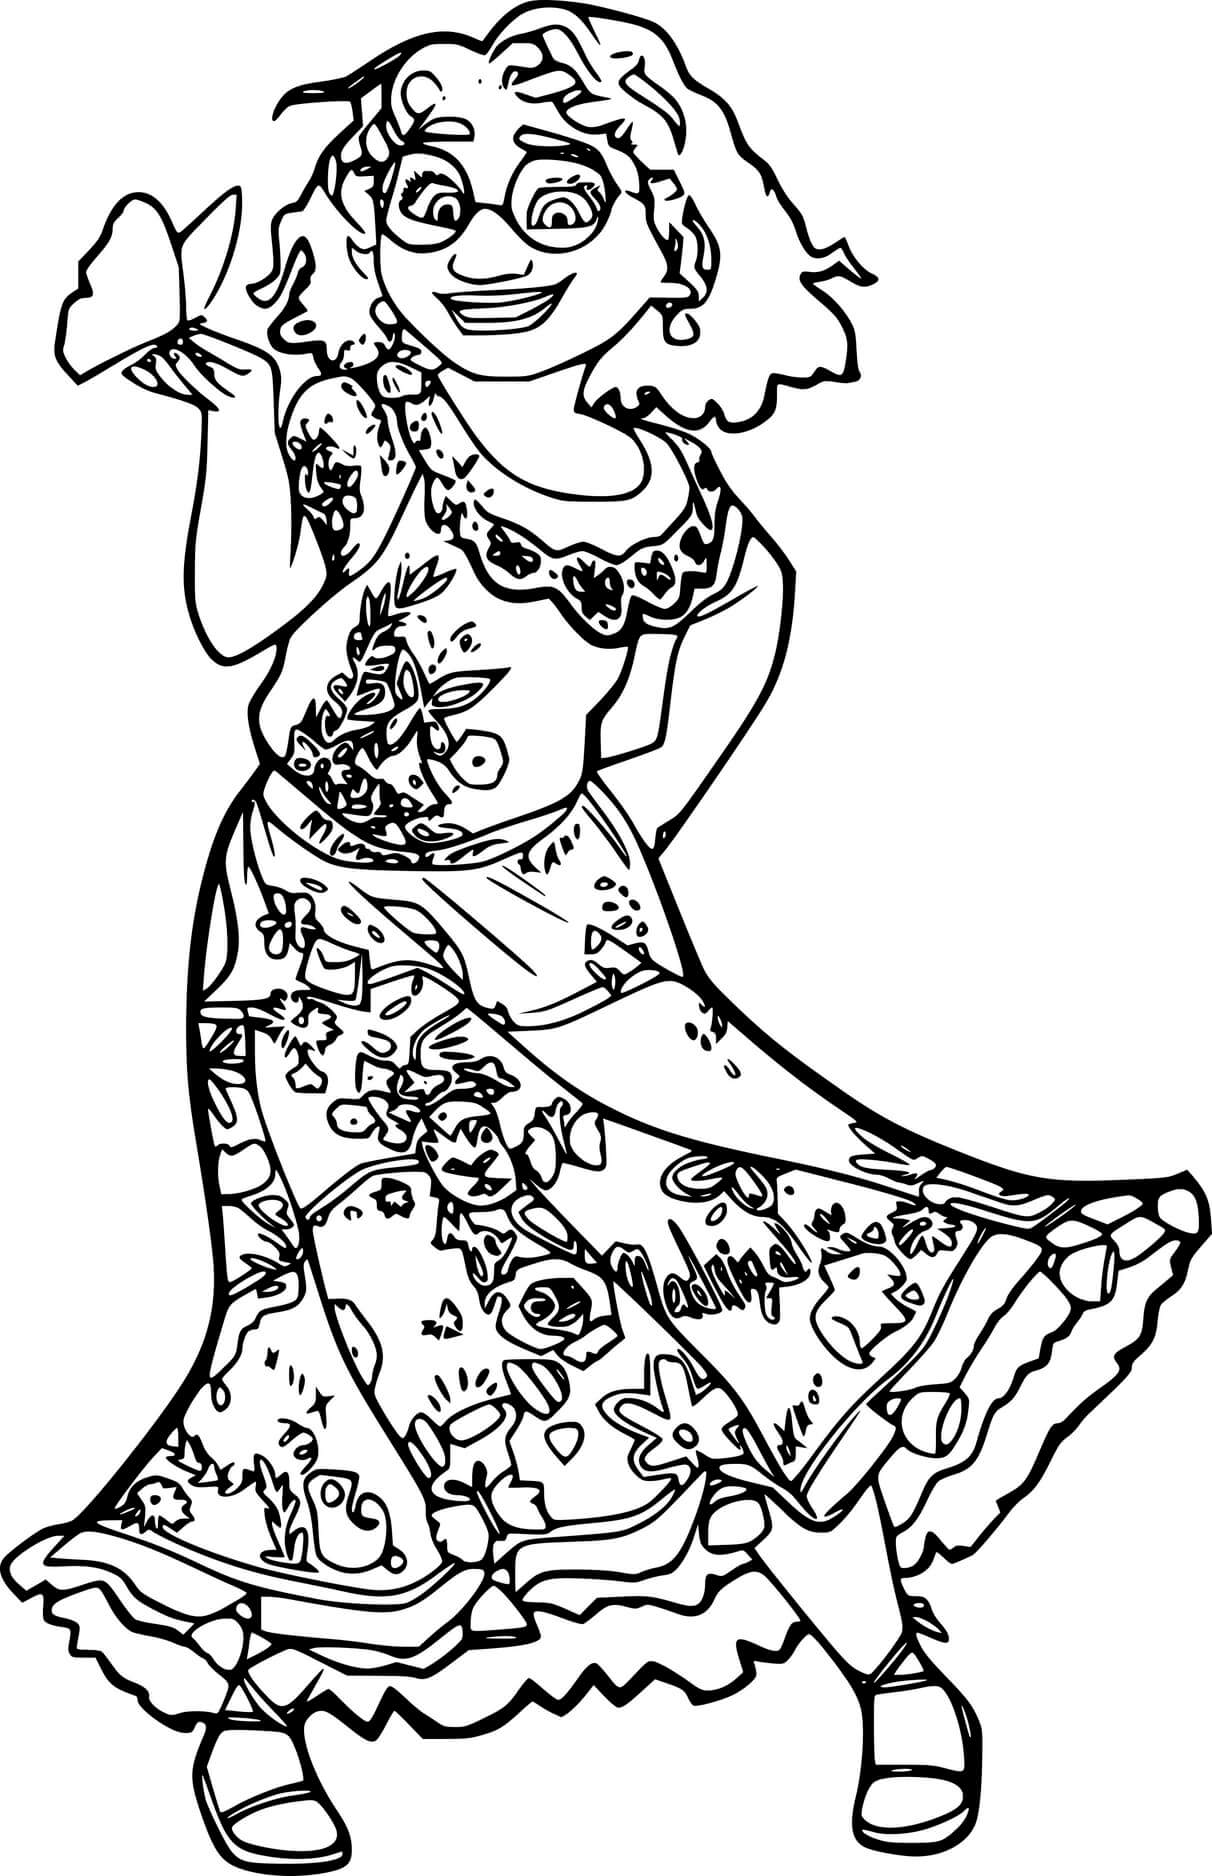 Encanto Mirabel Madrigal Coloring Pages - Coloring Cool